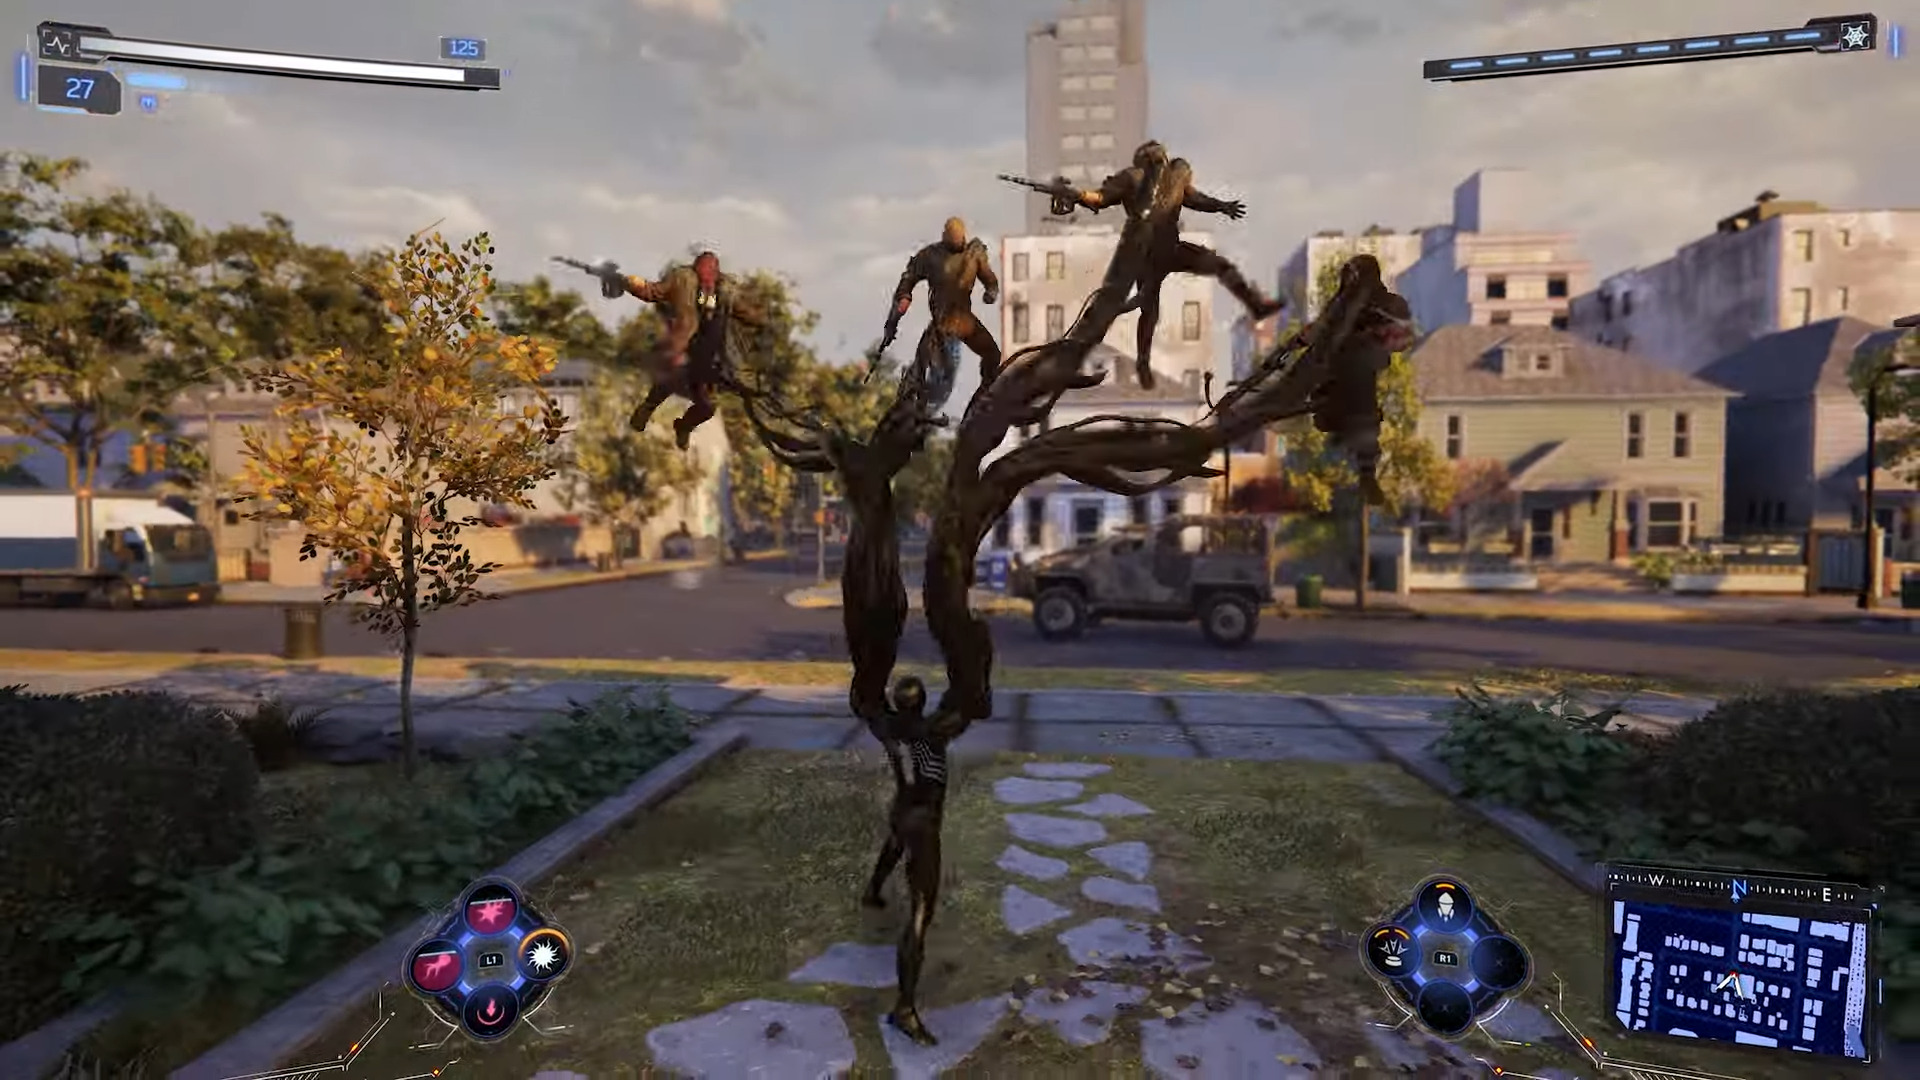 Spider-Man (Yuri Lowenthal) takes out a number of Kraven's thugs in Marvel's Spider-Man 2 (2023), Sony / Insomniac Games